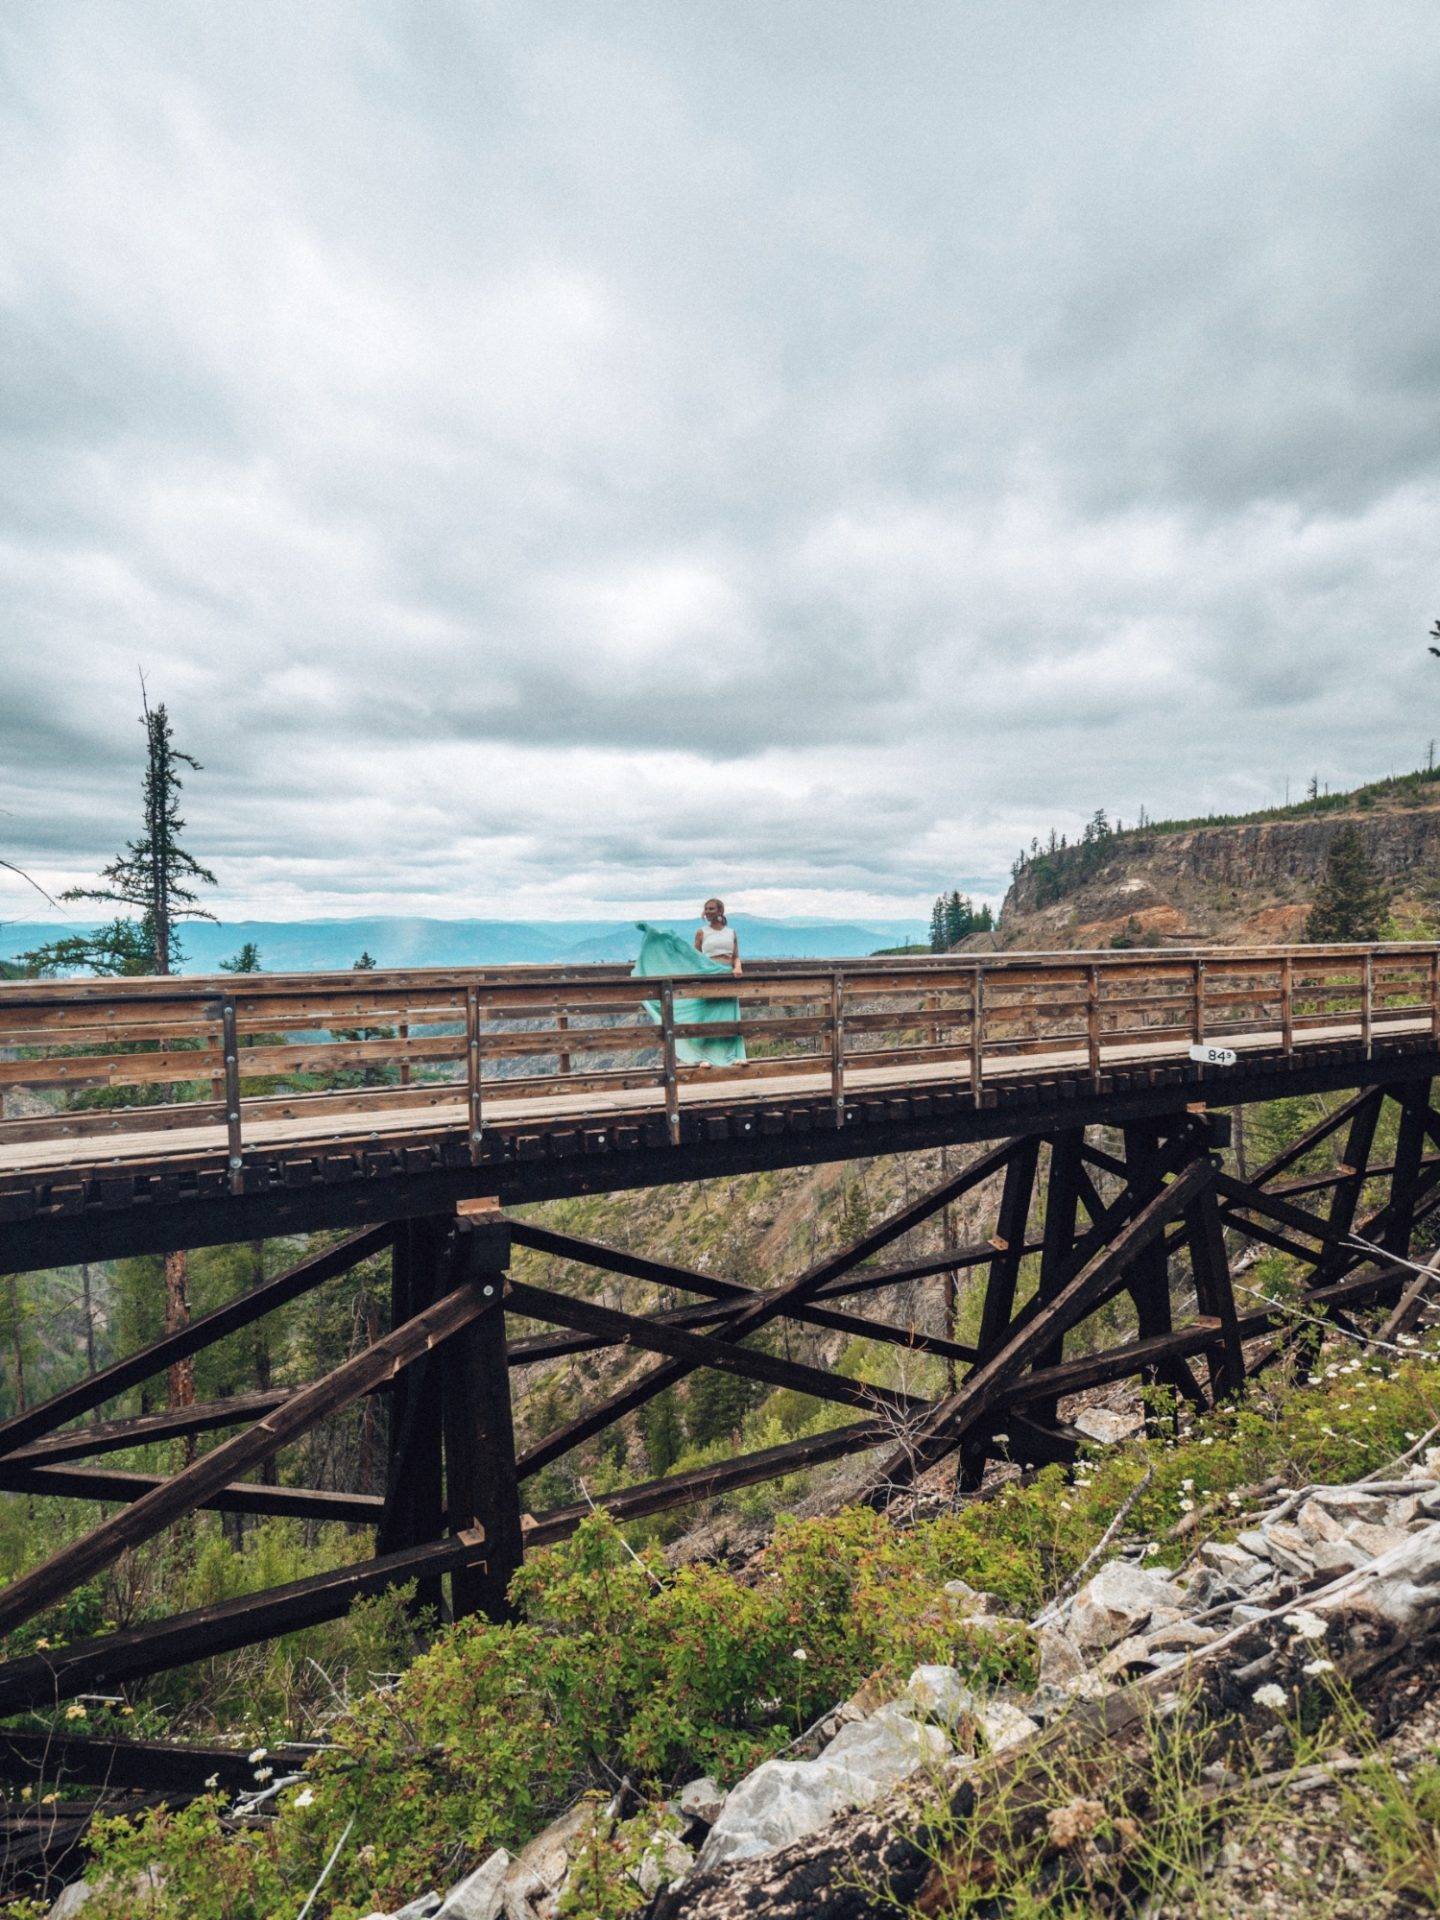 Planning a trip to Kelowna soon? This guide covers all the best things to do in Kelowna from a locals perspective! From wineries and cideries, to adventure activities, hikes, waters sports and more. This guide has everything you need to plan your visit to beautiful Kelowna! Pictured here: Kettle Valley Trail